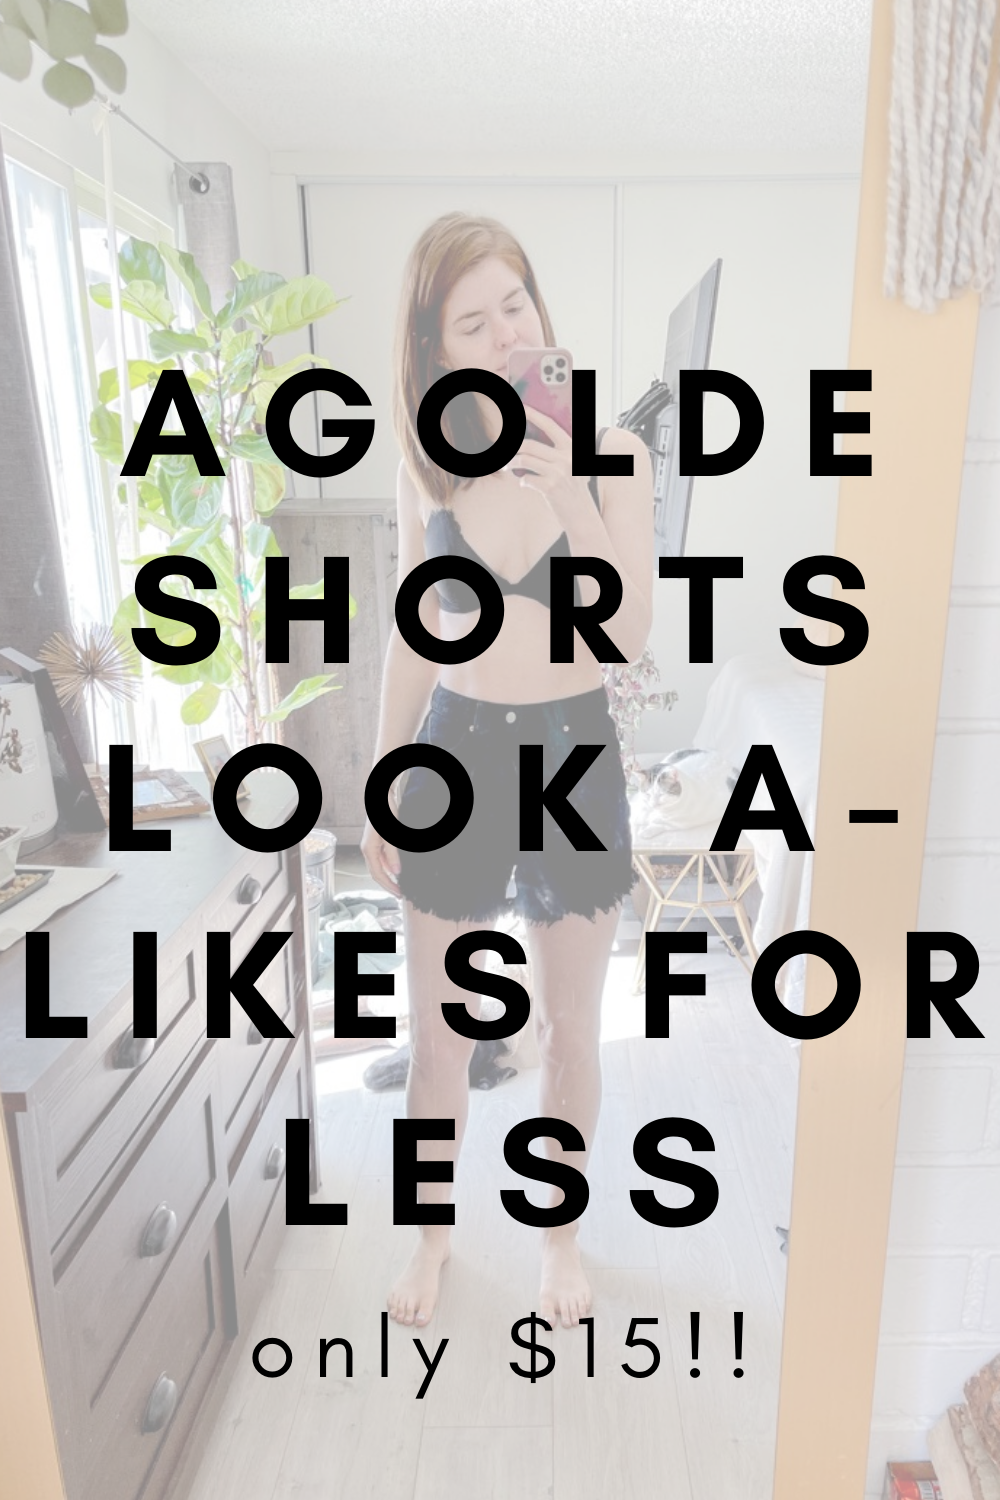 agolde shorts look a-likes for less, lments of style, parker shorts, dee shorts, wild fable target shorts review, budget friendly cut off vintage denim shorts, 100% cotton, the fabric of our lives